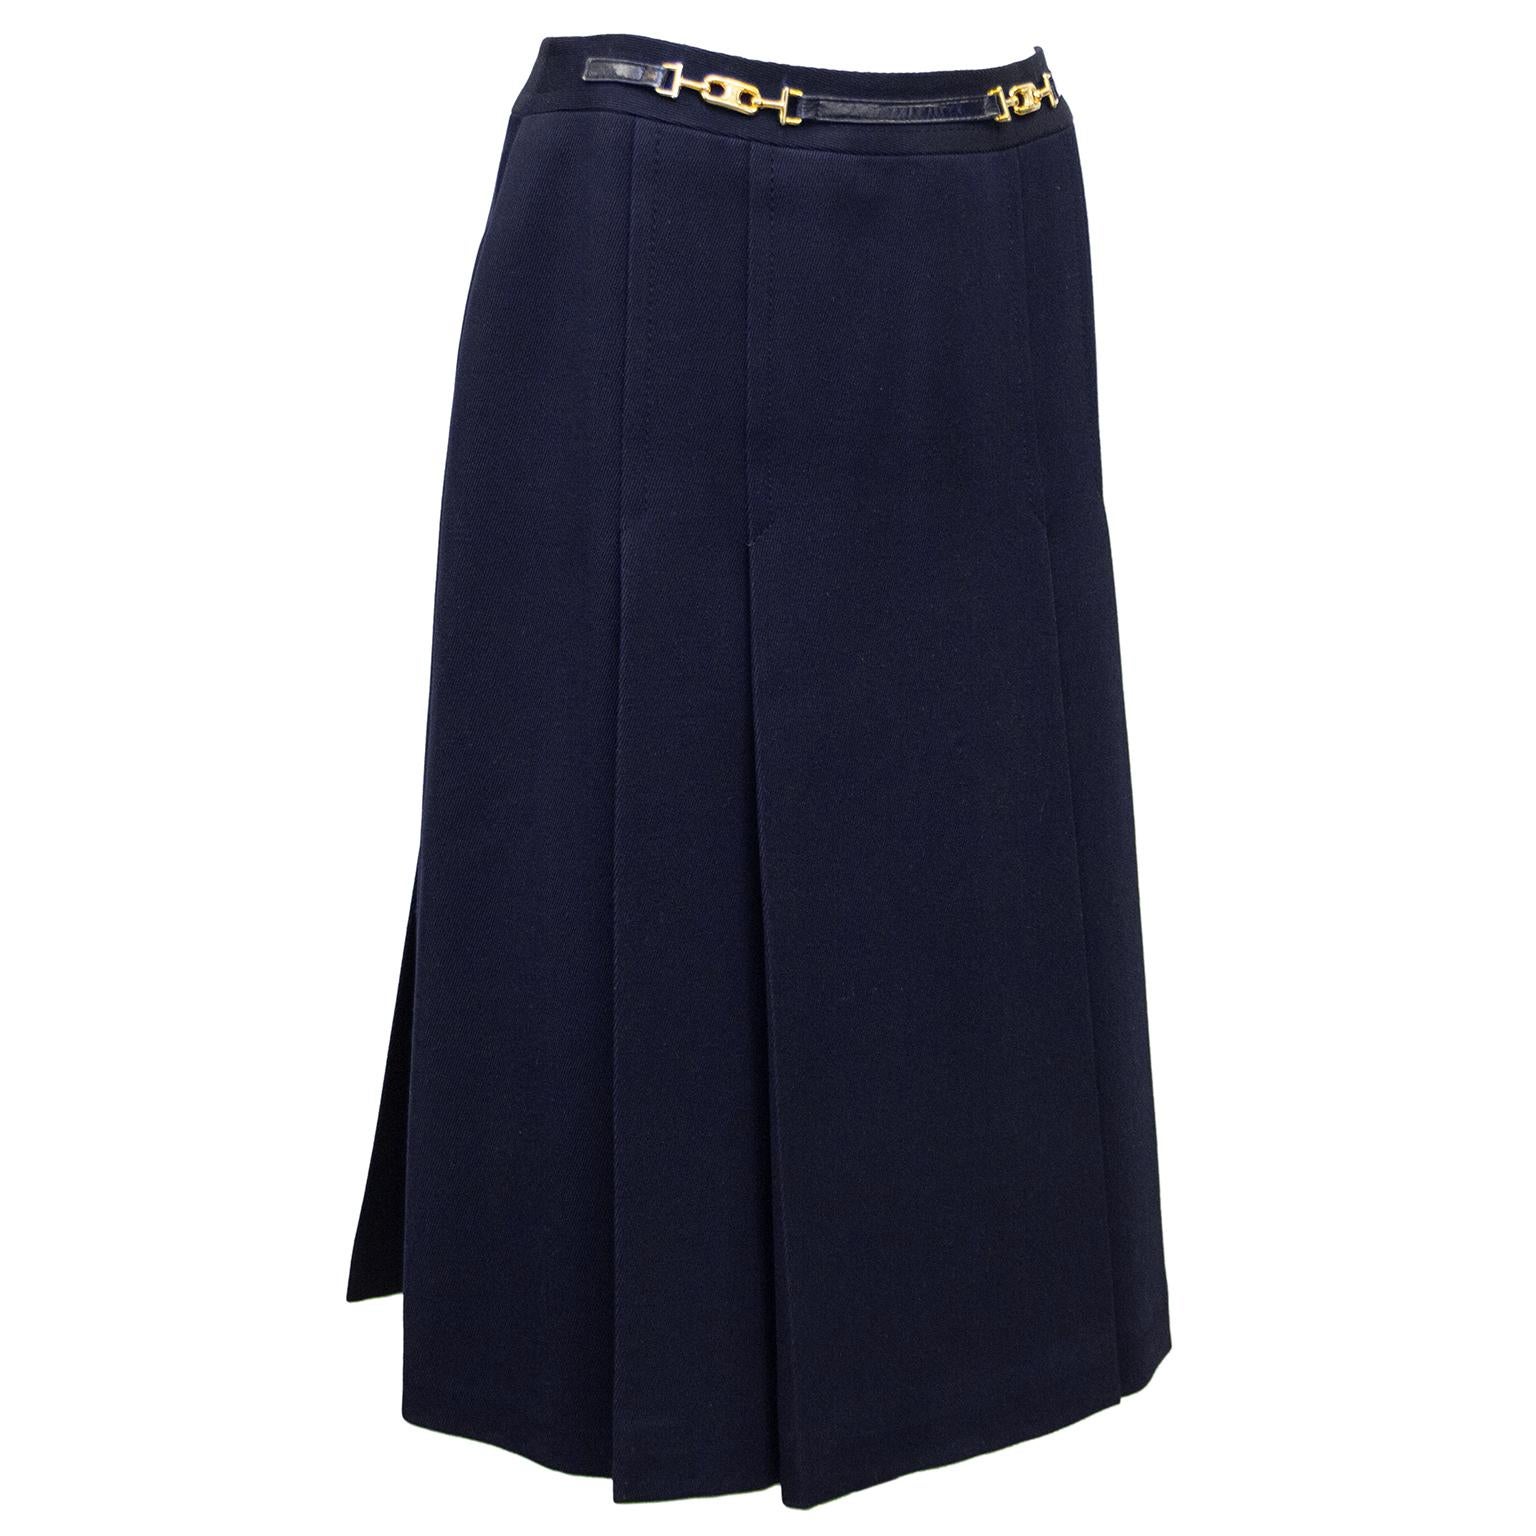 1970's classic Celine navy blue wool gabardine skirt with half navy leather and gold belt at waistband. Inverted stitched pleats on the front and back. Overall A line shape. In excellent condition, side zipper with hook and eye. Fits like a US size